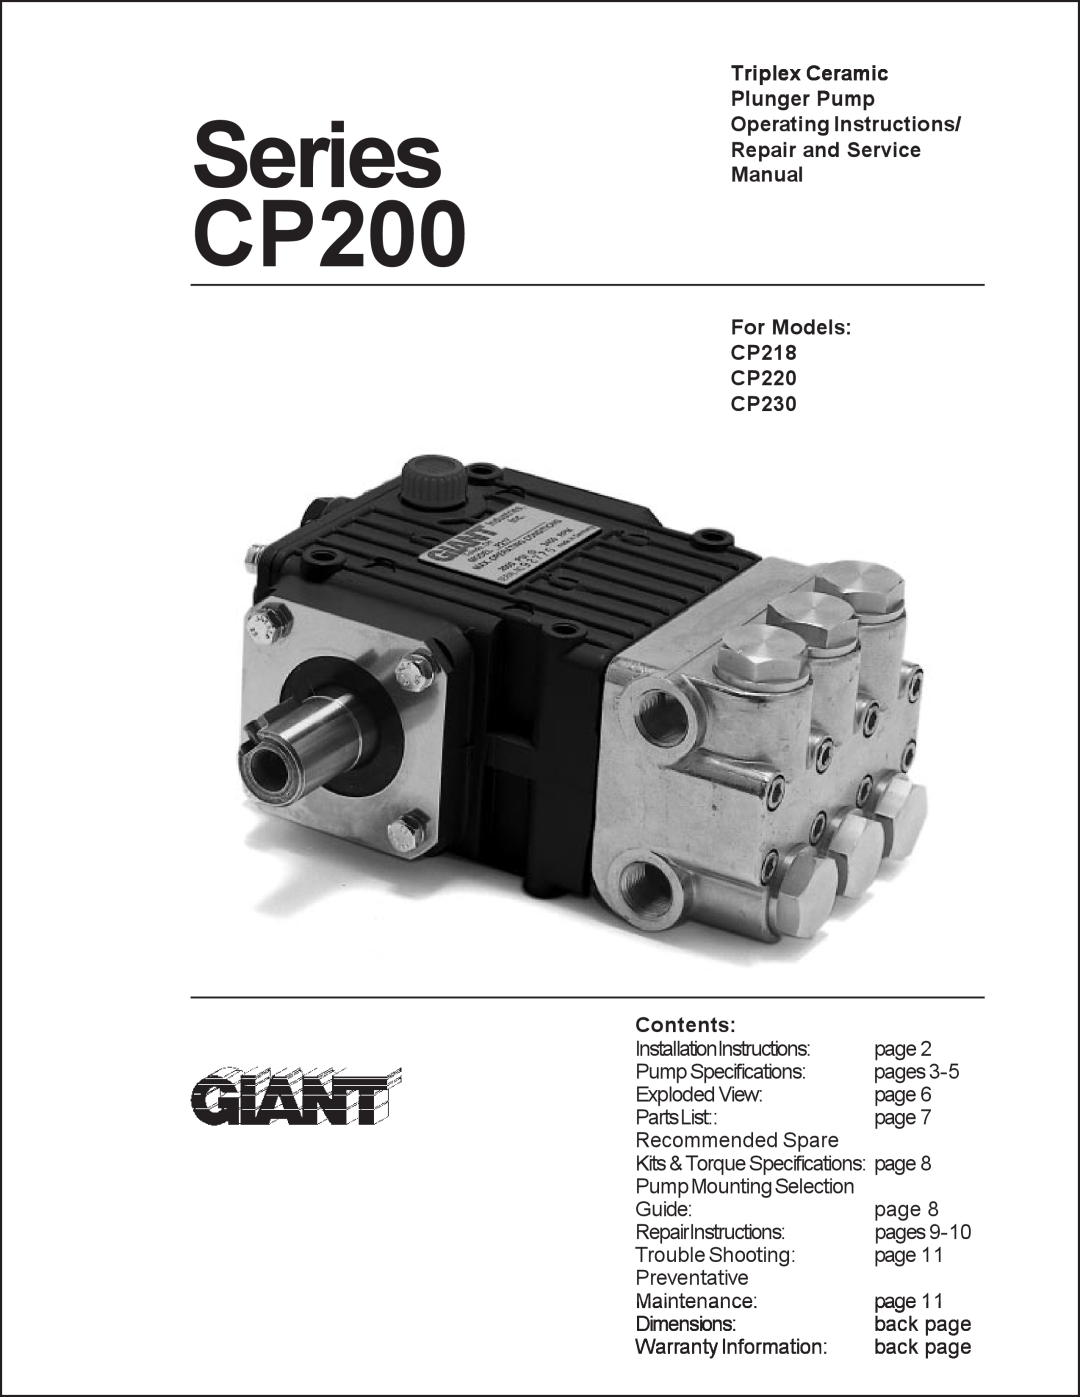 Giant CP218, CP200 service manual Triplex Ceramic Plunger Pump Operating Instructions, Repair and Service Manual, Contents 